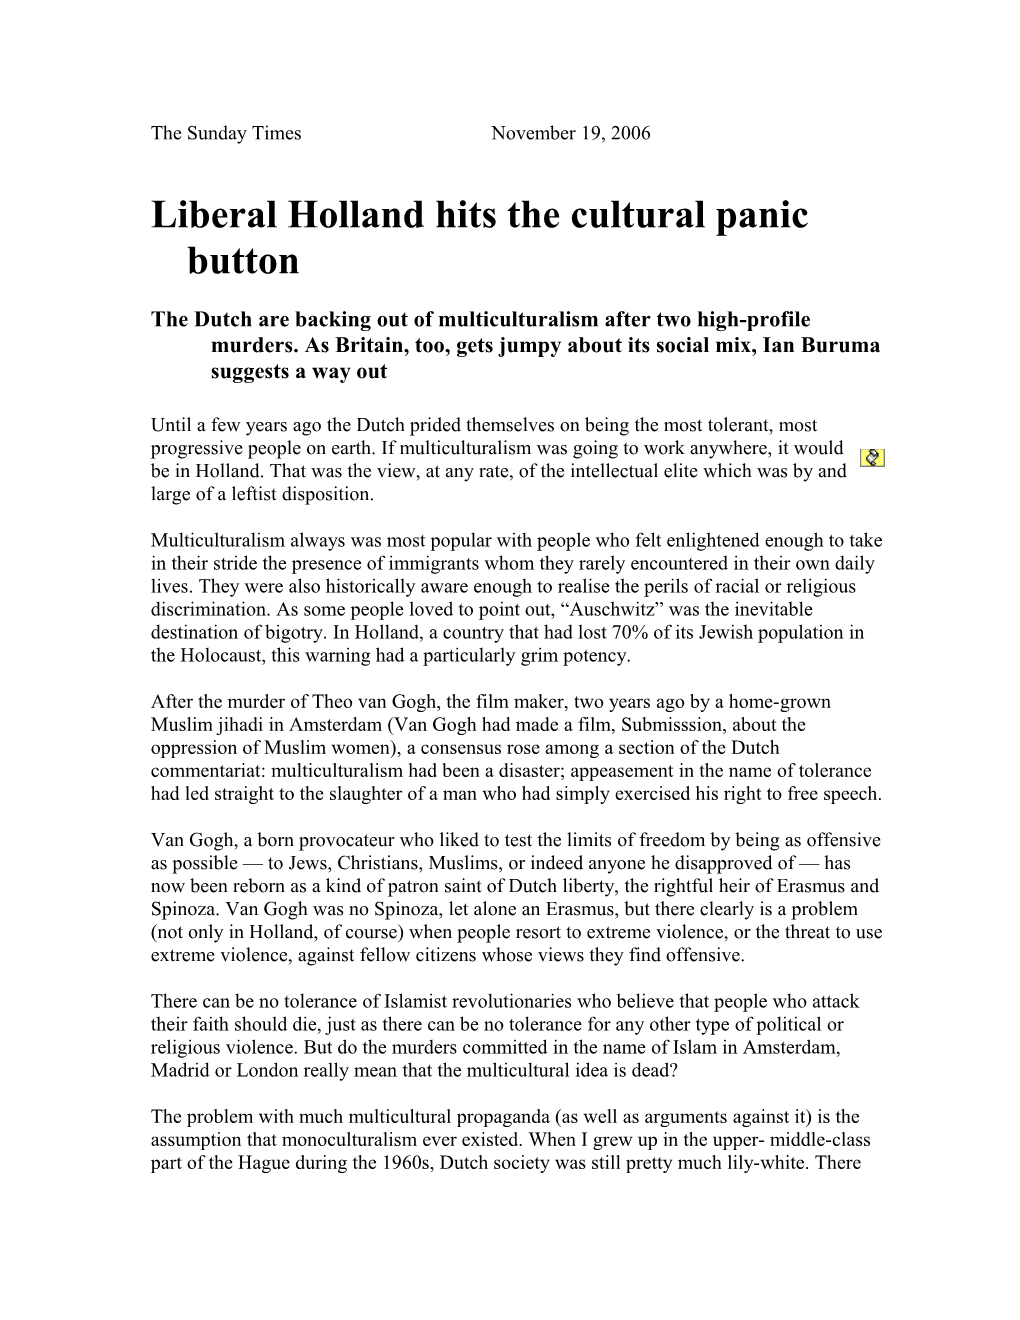 Liberal Holland Hits the Cultural Panic Button